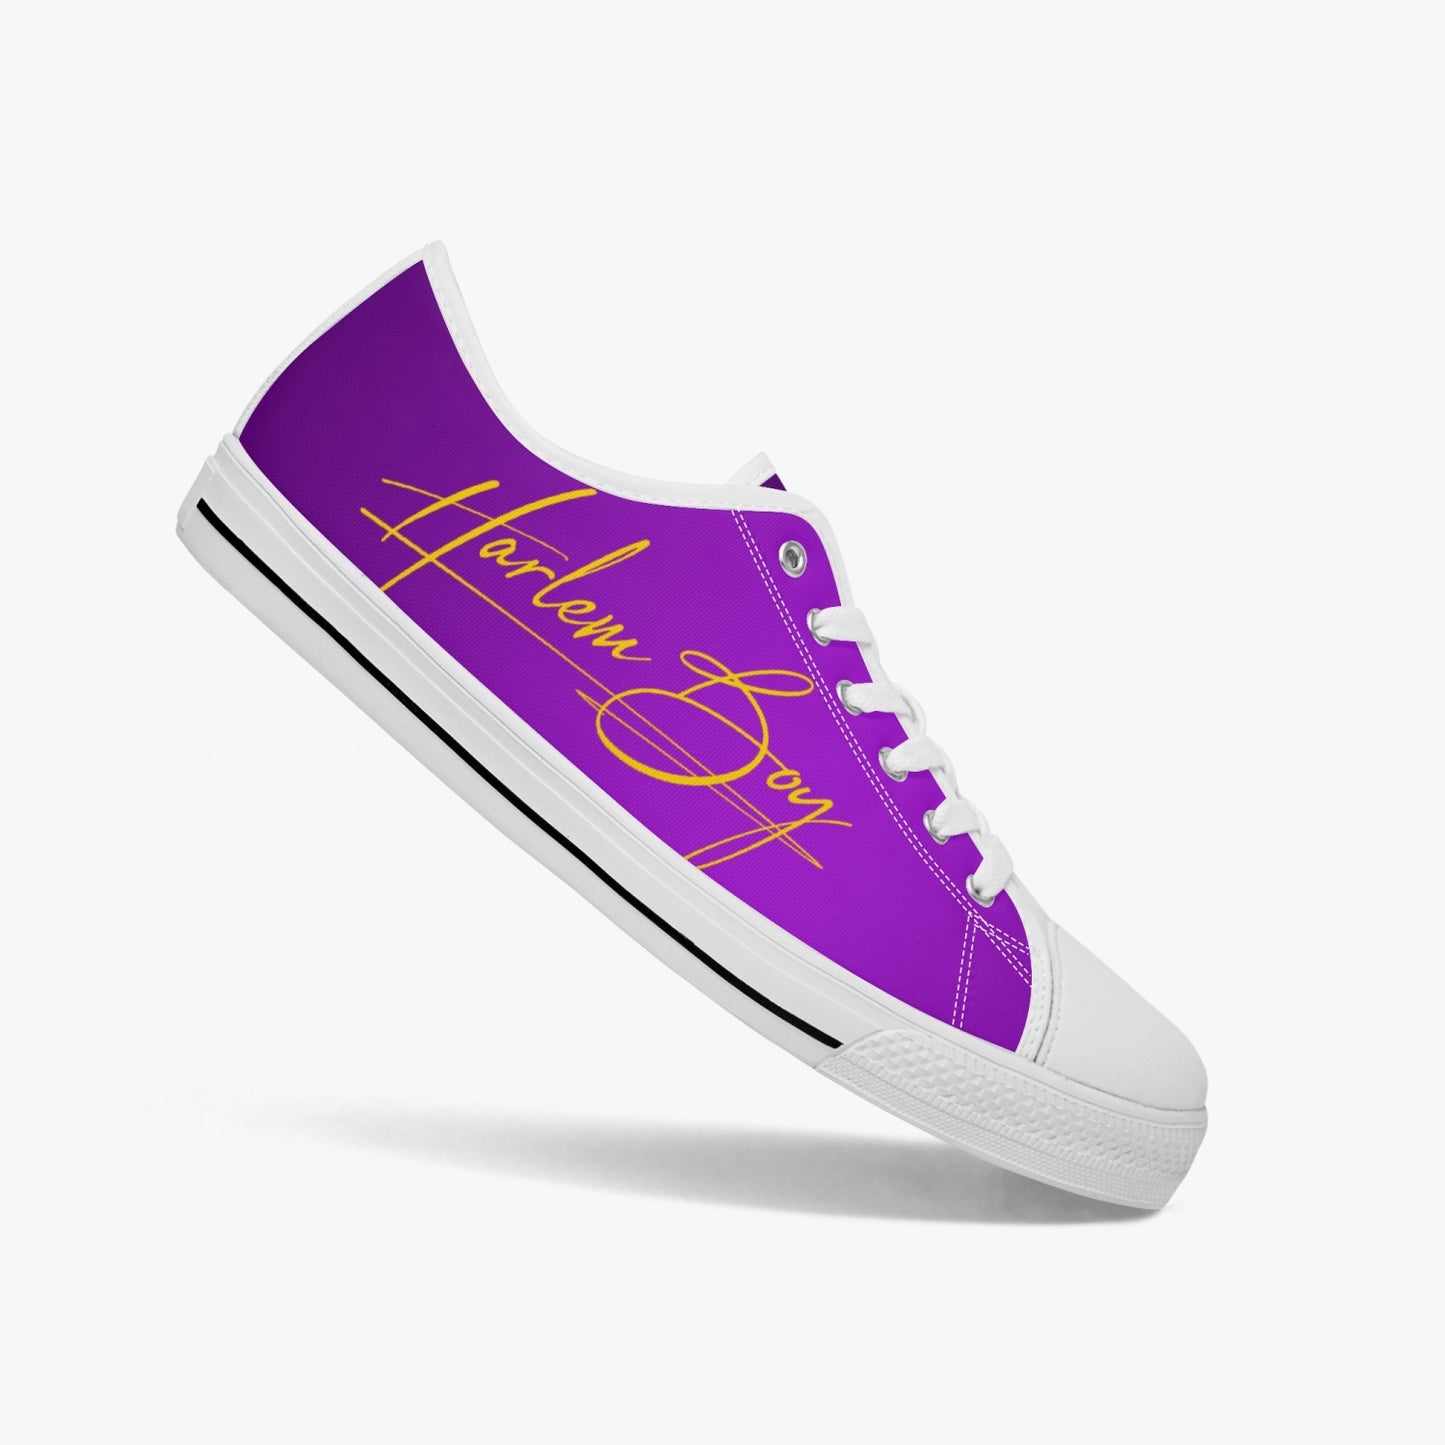 HB Harlem Boy "Lenox Ave" Classic Low Tops - Purple and Gold - Men (Black or White Sole)